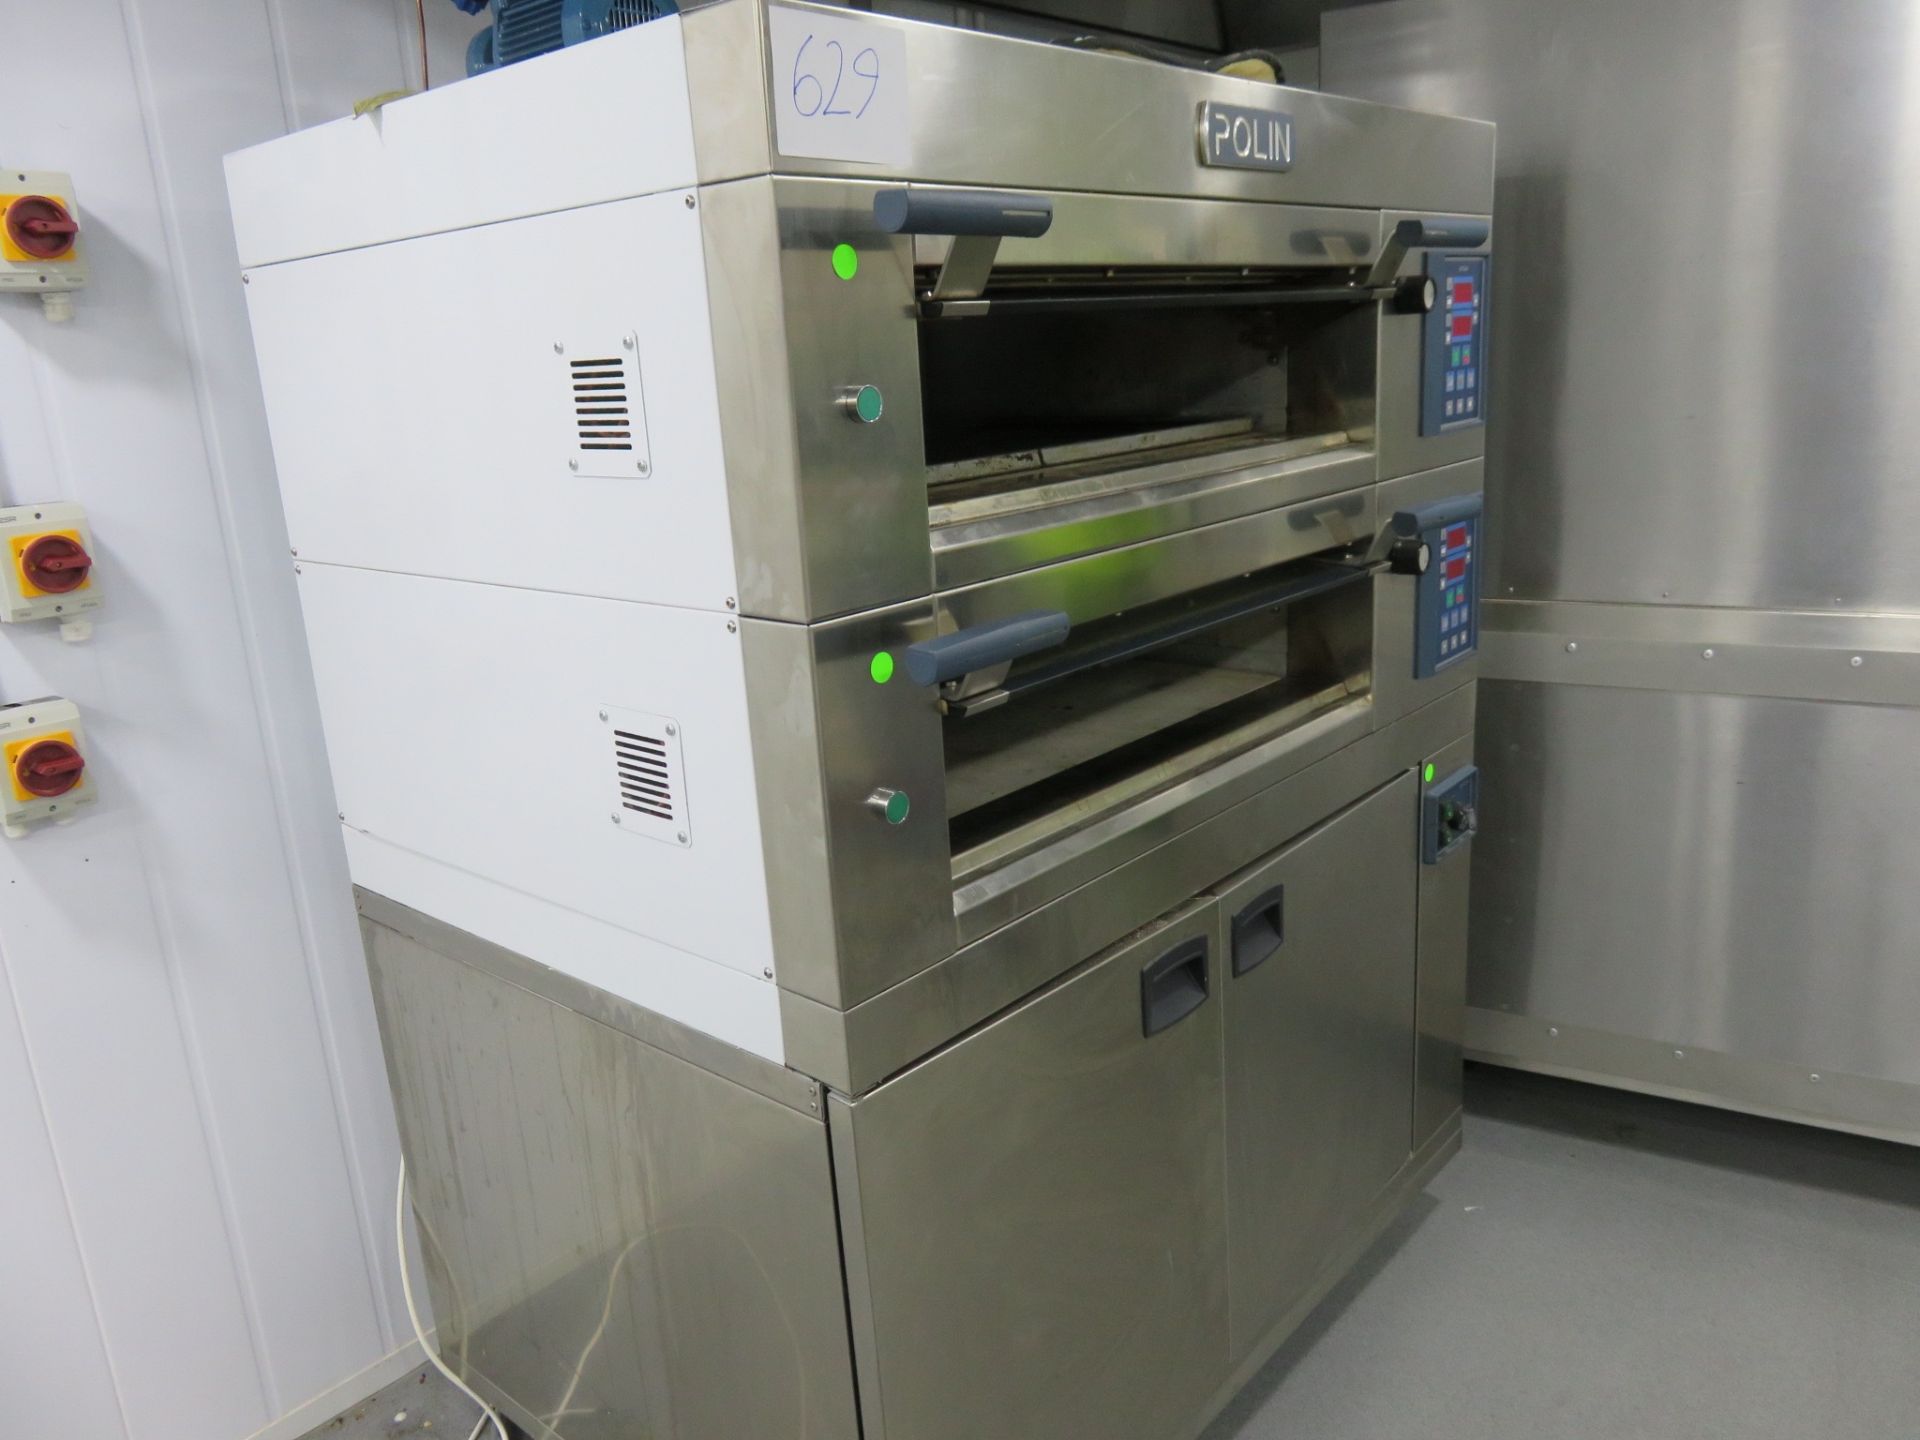 Test Kitchen Stonebake Polin 2 Deck Oven. Complete with steam. 2010 Cams. Lift out charge £60 - Image 3 of 3